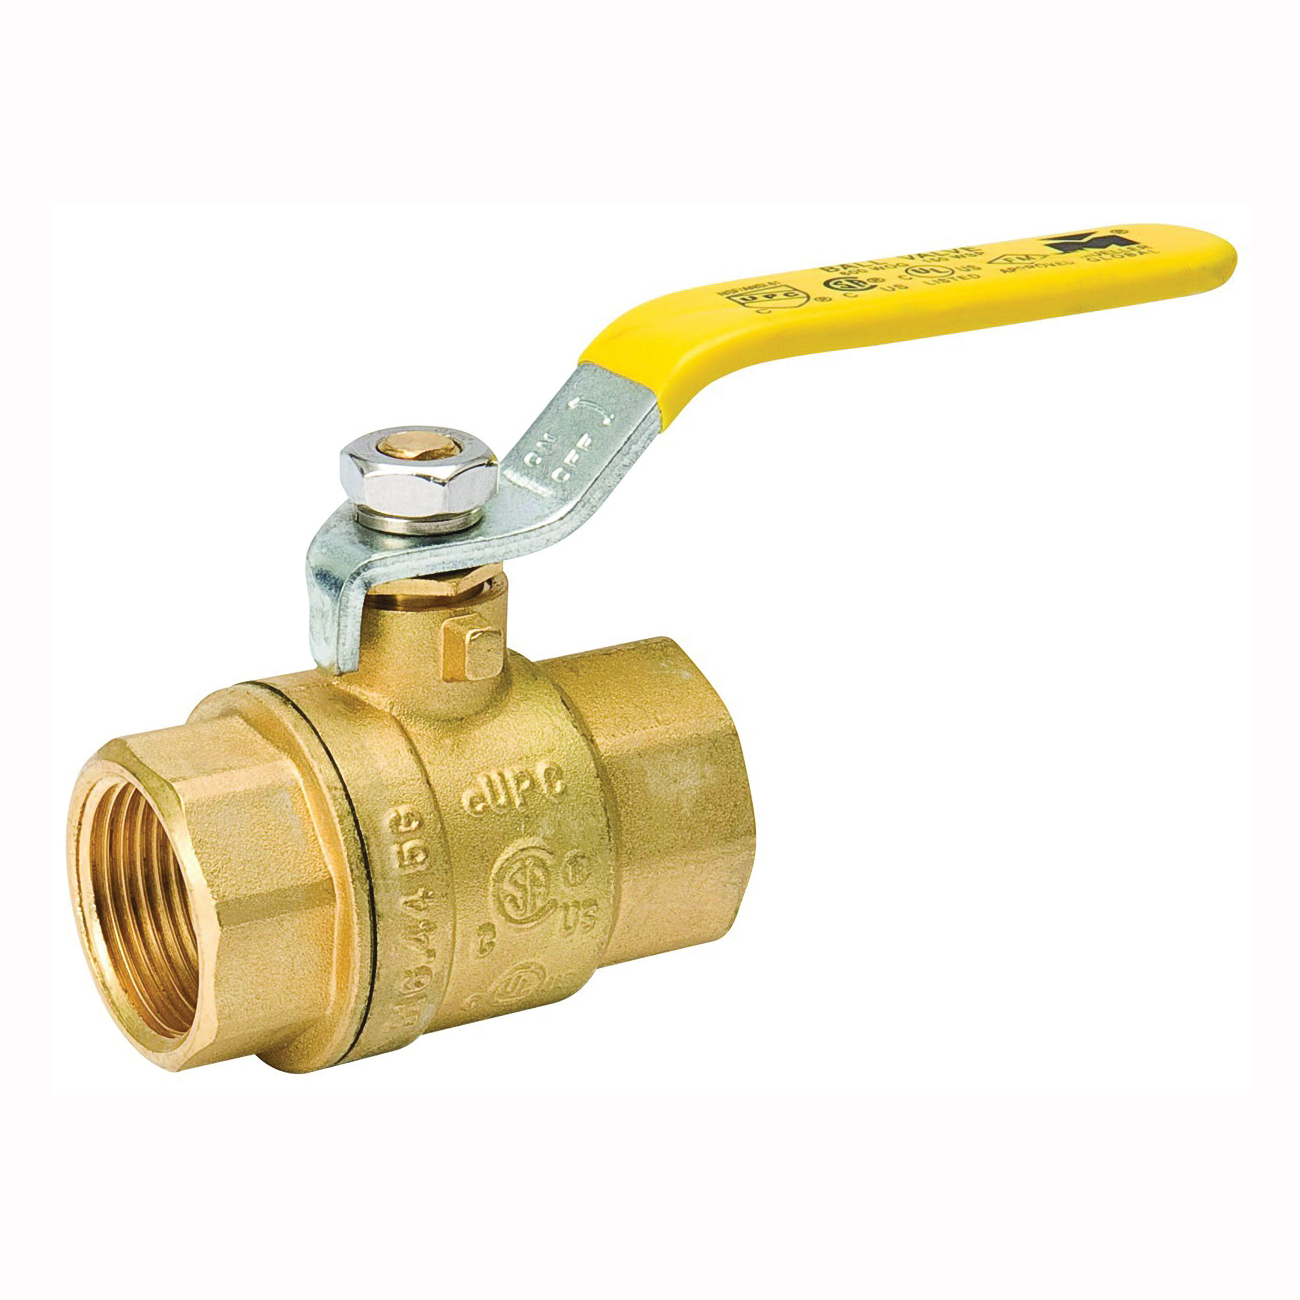 107-825NL Ball Valve, 1 in Connection, FPT x FPT, 600/150 psi Pressure, Manual Actuator, Brass Body